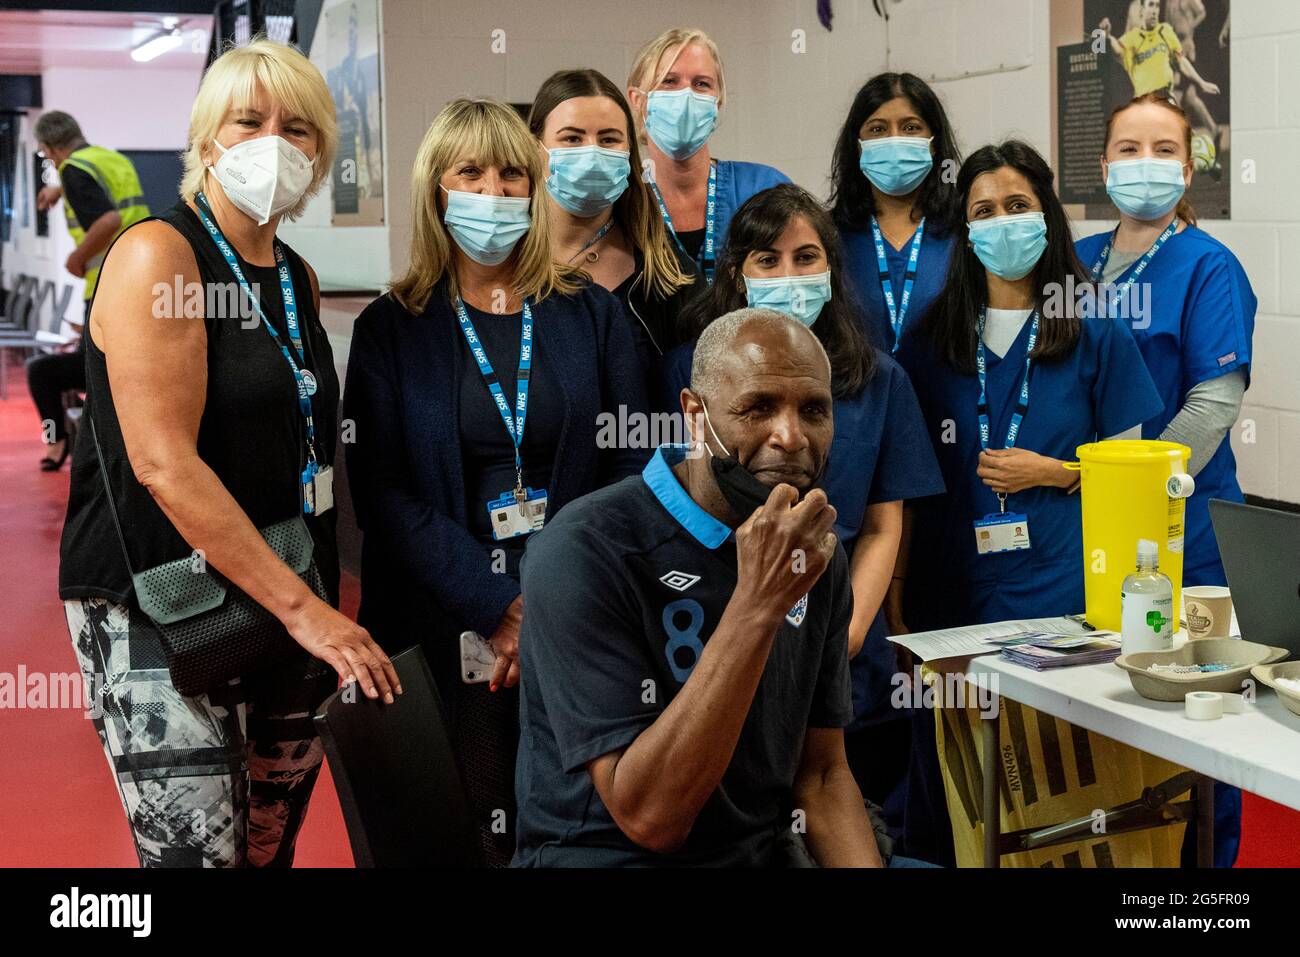 Watford, UK.  27 June 2021. Former Watford player Luther Blissett poses with medical staff at a pop-up mass vaccination clinic at Watford FC’s Vicarage Road Stadium as part of the “Grab a jab” campaign. The NHS is also promoting a number of walk-in clinics this weekend across the capital to try to increase the number of over 18s receiving a jab as cases of the Delta variant are reported to be on the rise.  Credit: Stephen Chung / Alamy Live News Stock Photo